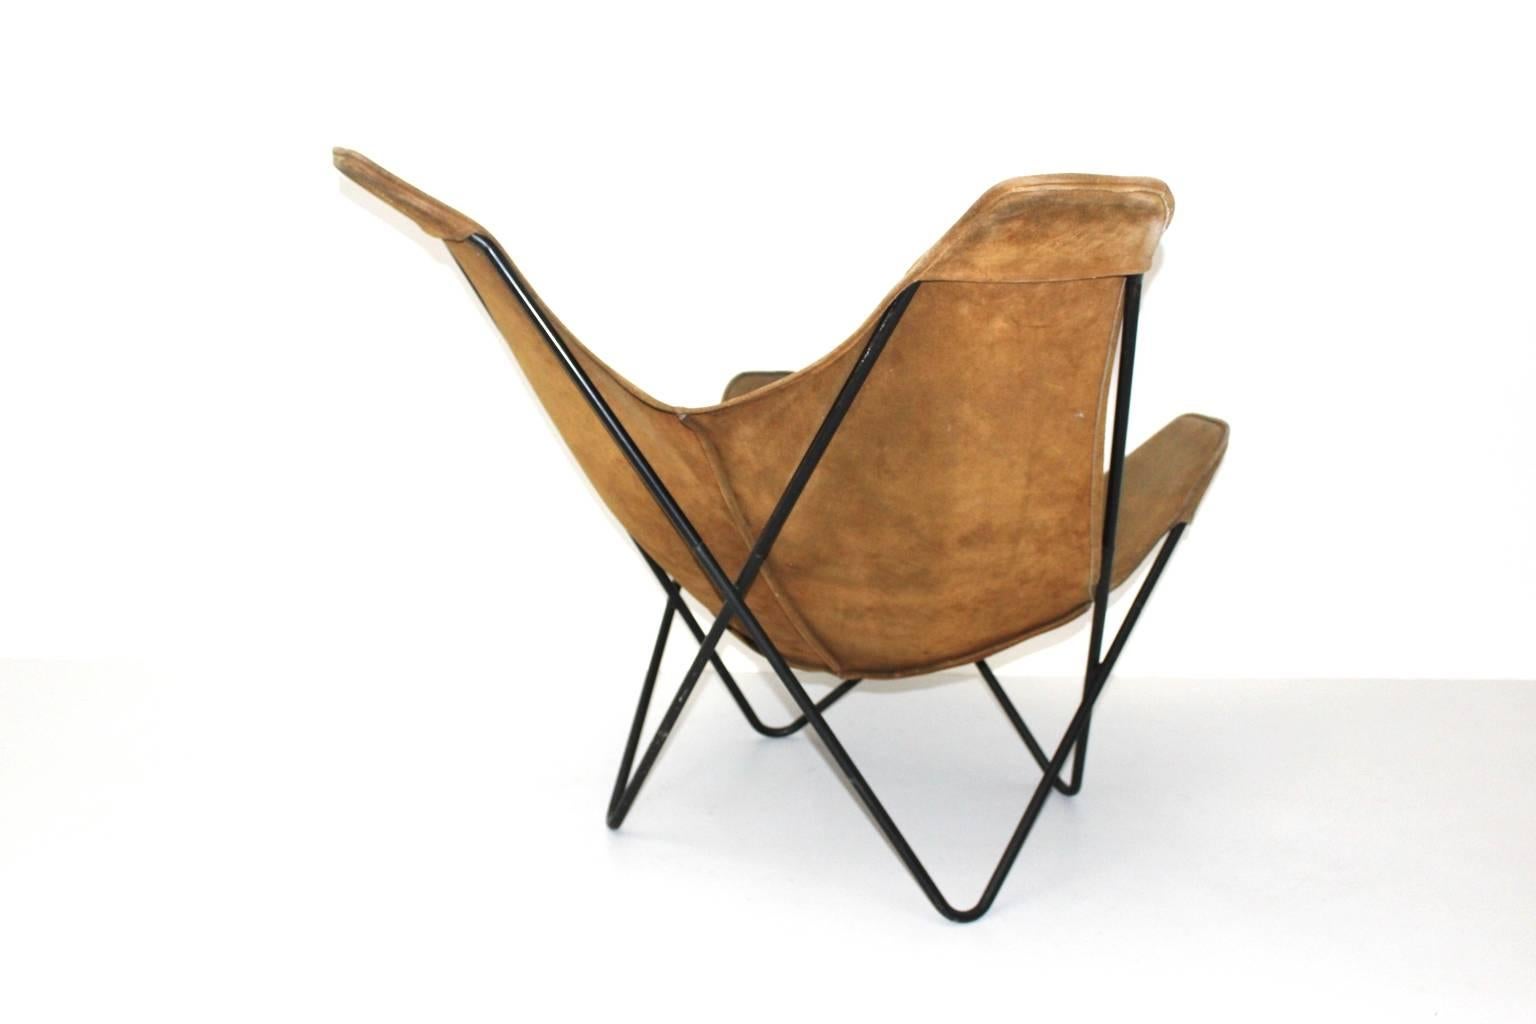 Fabulous Butterfly Chair ; designed by Jorge Ferrari-Hardoy, Juan Kurchann & Antonio Bonet, 1938 and produced by Knoll Associates New York, 1947-1975.

This presented chair consists of a black enameled tabular steel frame with a brown suede leather